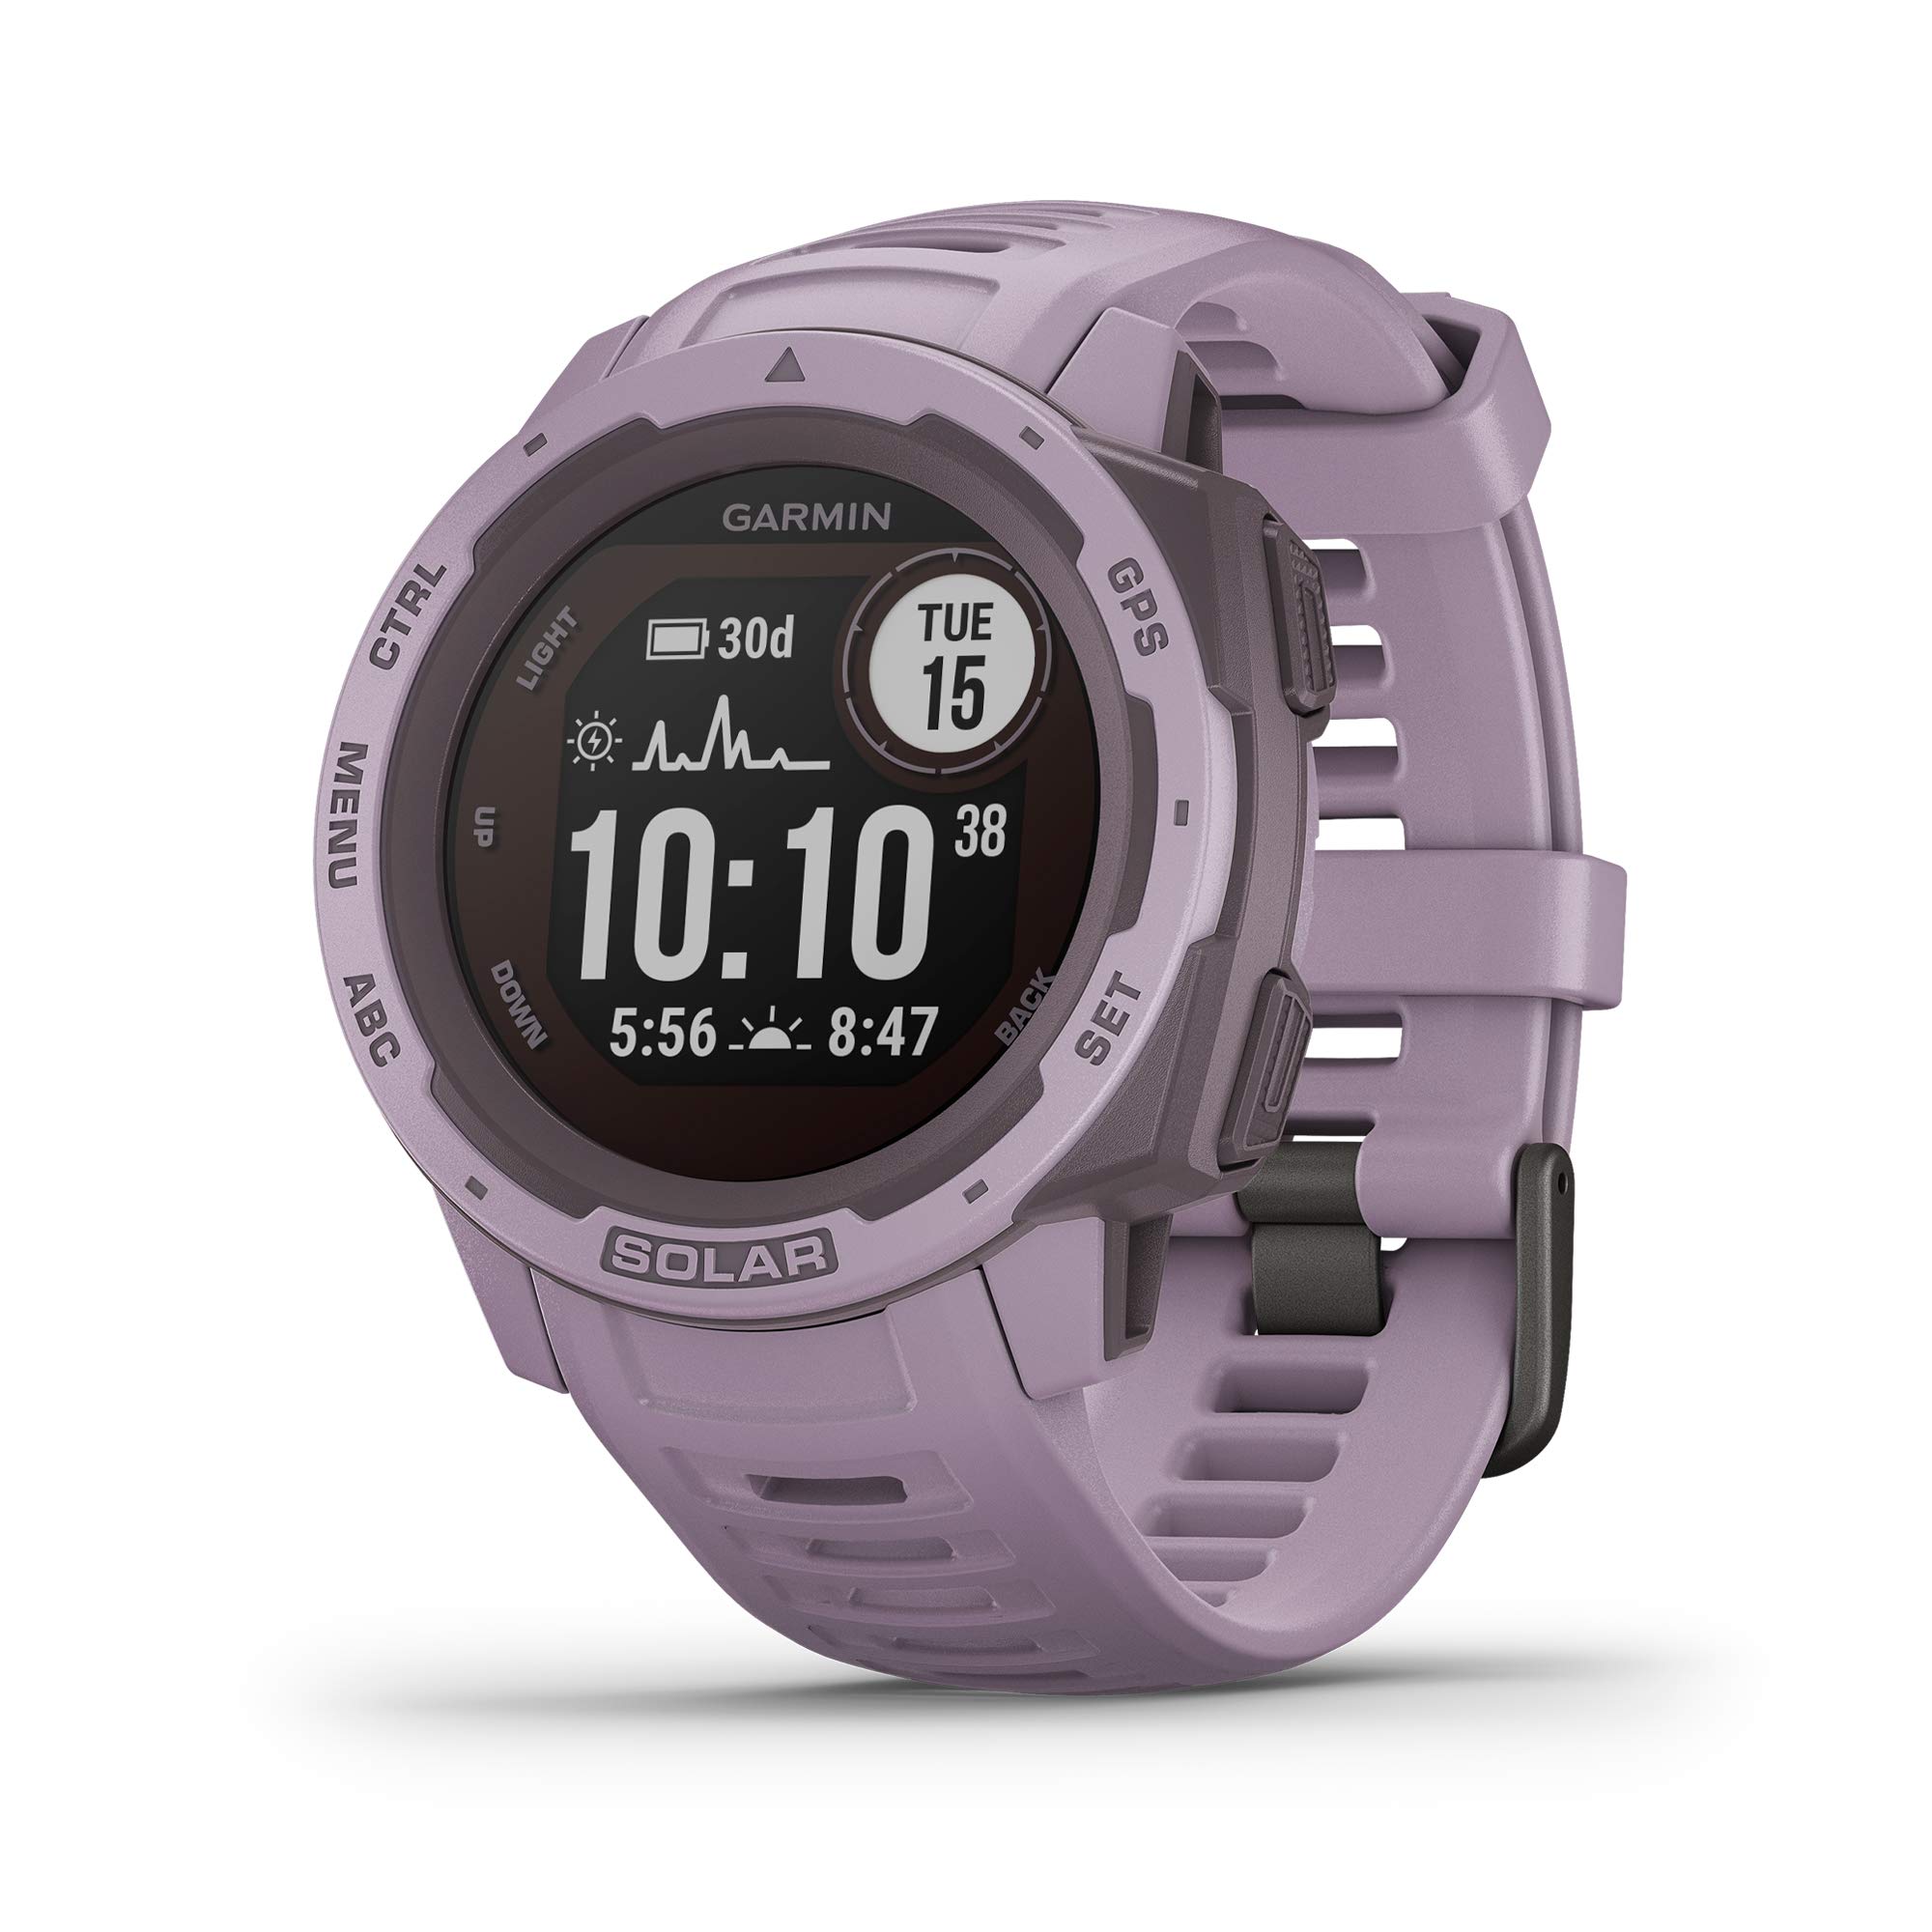 Garmin Instinct Solar, Rugged Outdoor Smartwatch with Solar Charging Capabilities, Built-in Sports Apps and Health Monitoring, Orchid Purple